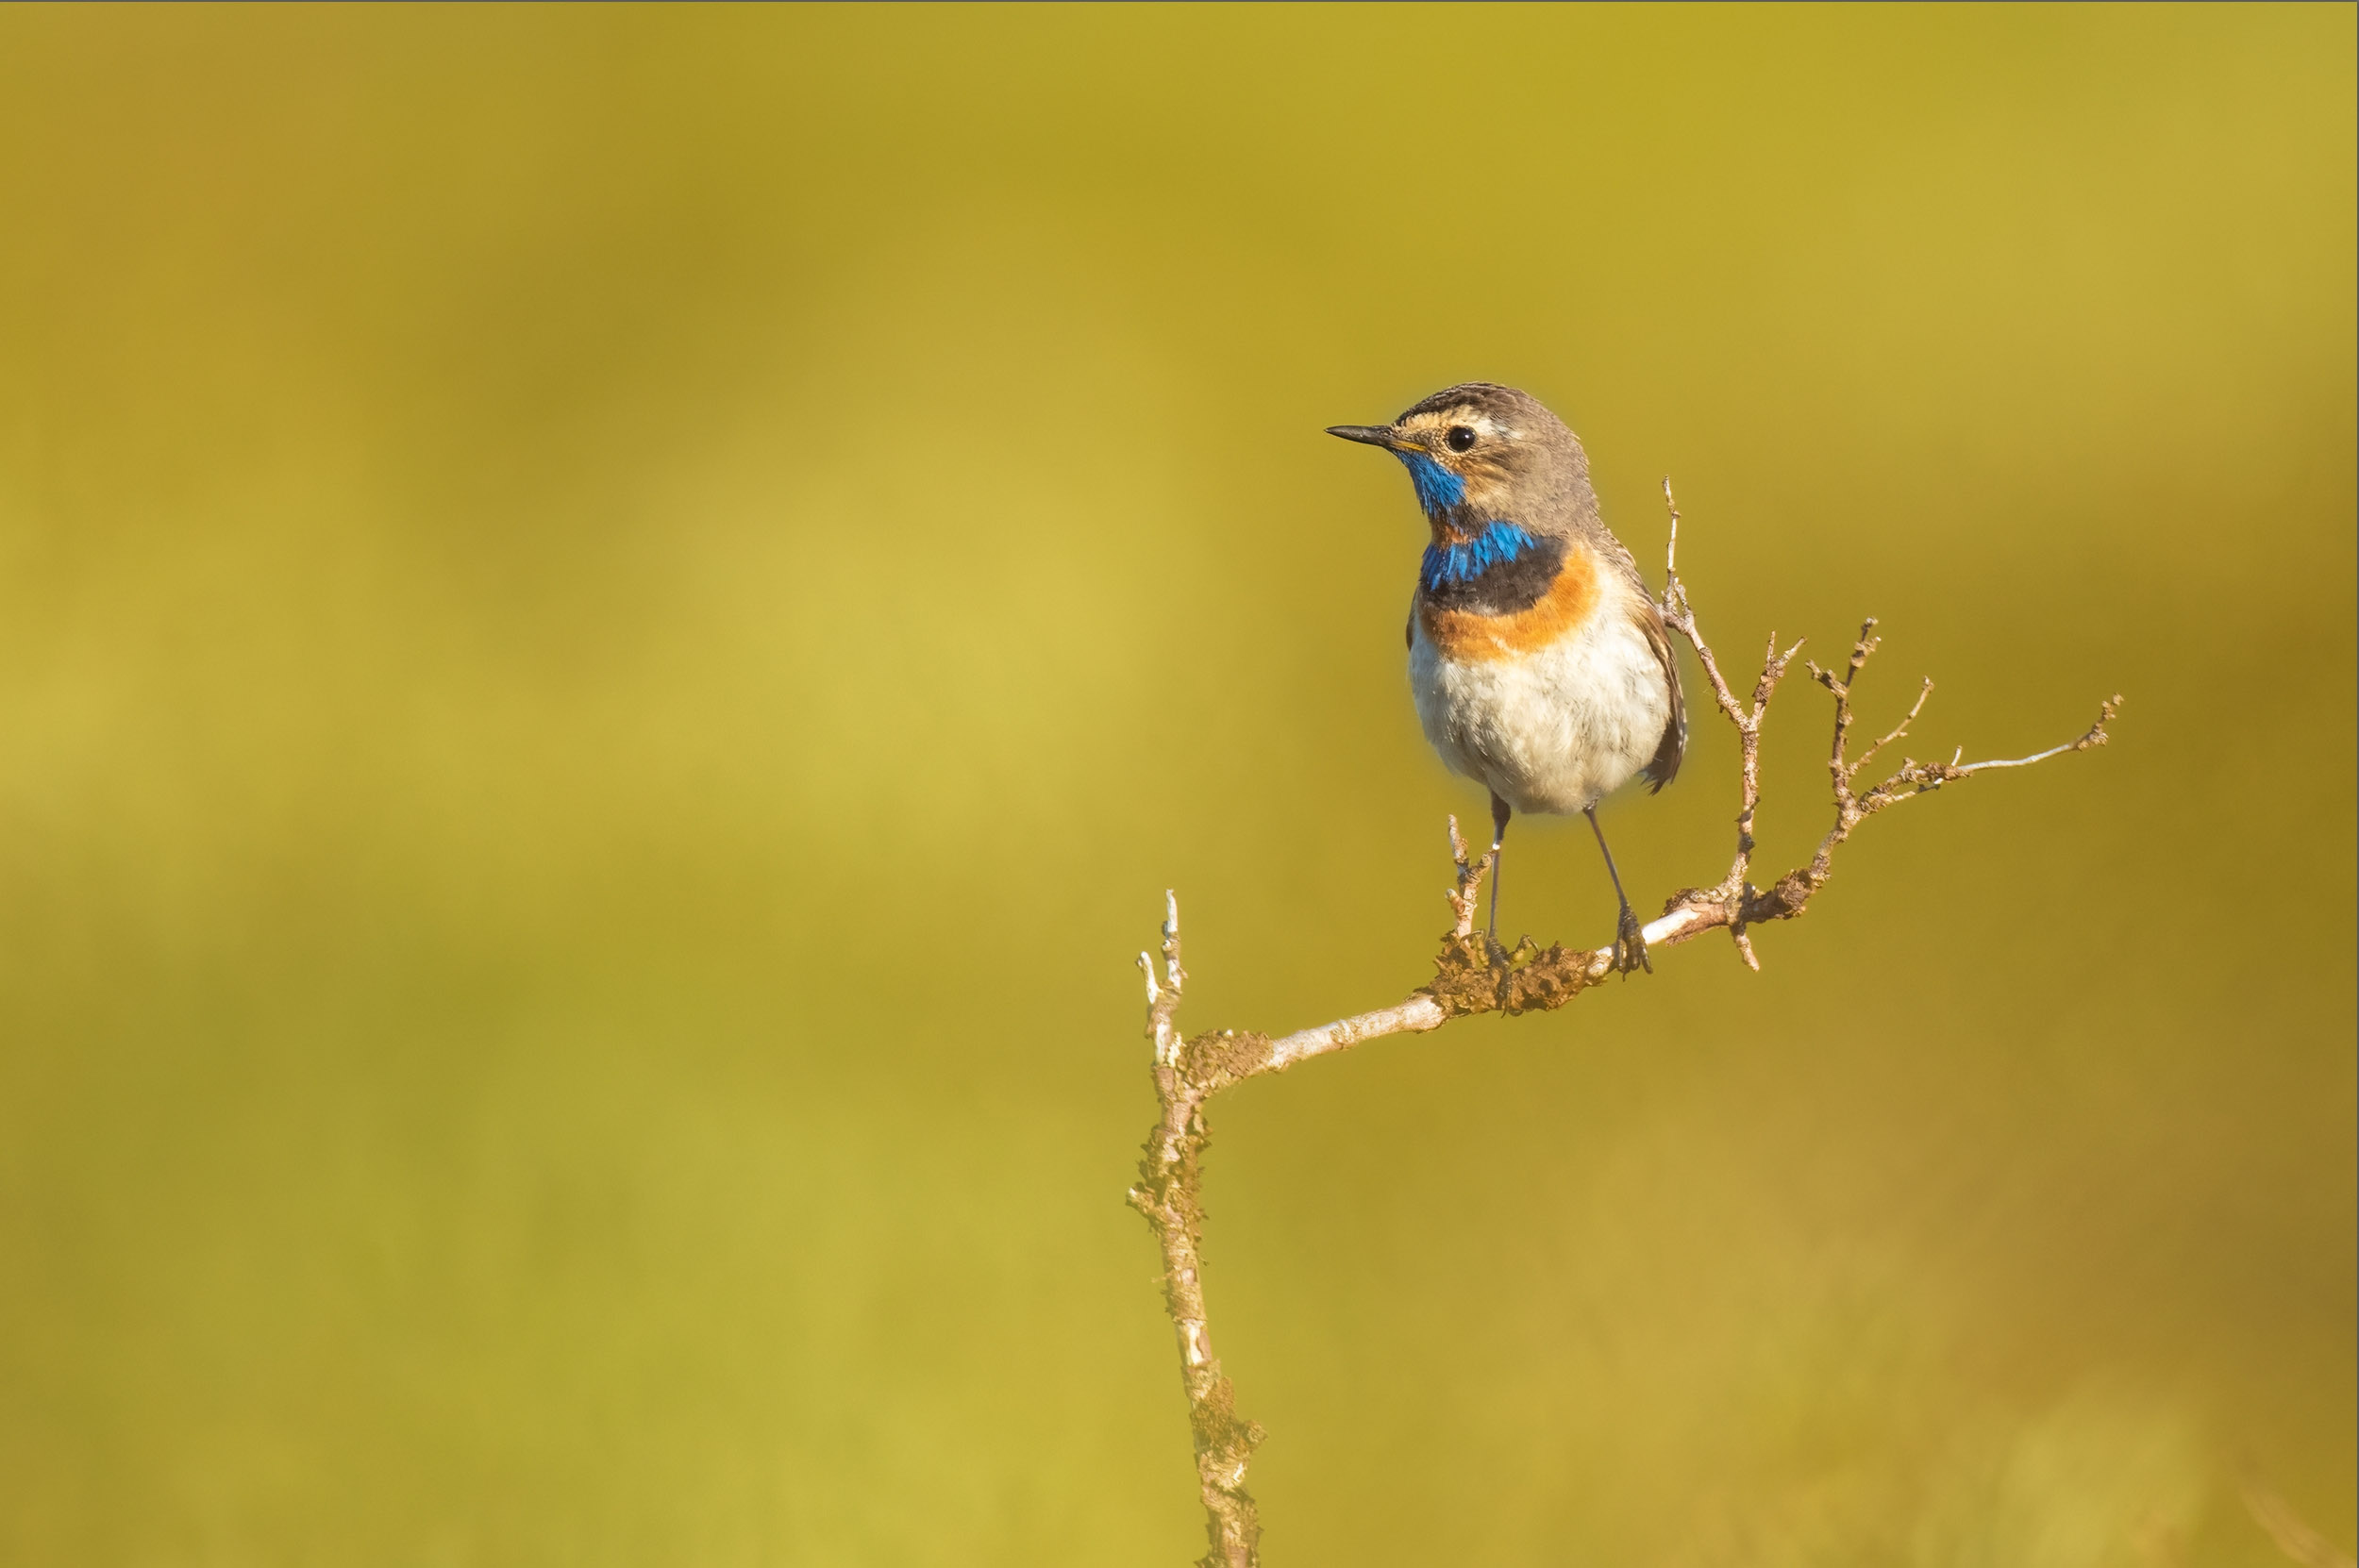 A lone Bluethroat perched on a small stick against an orange background.